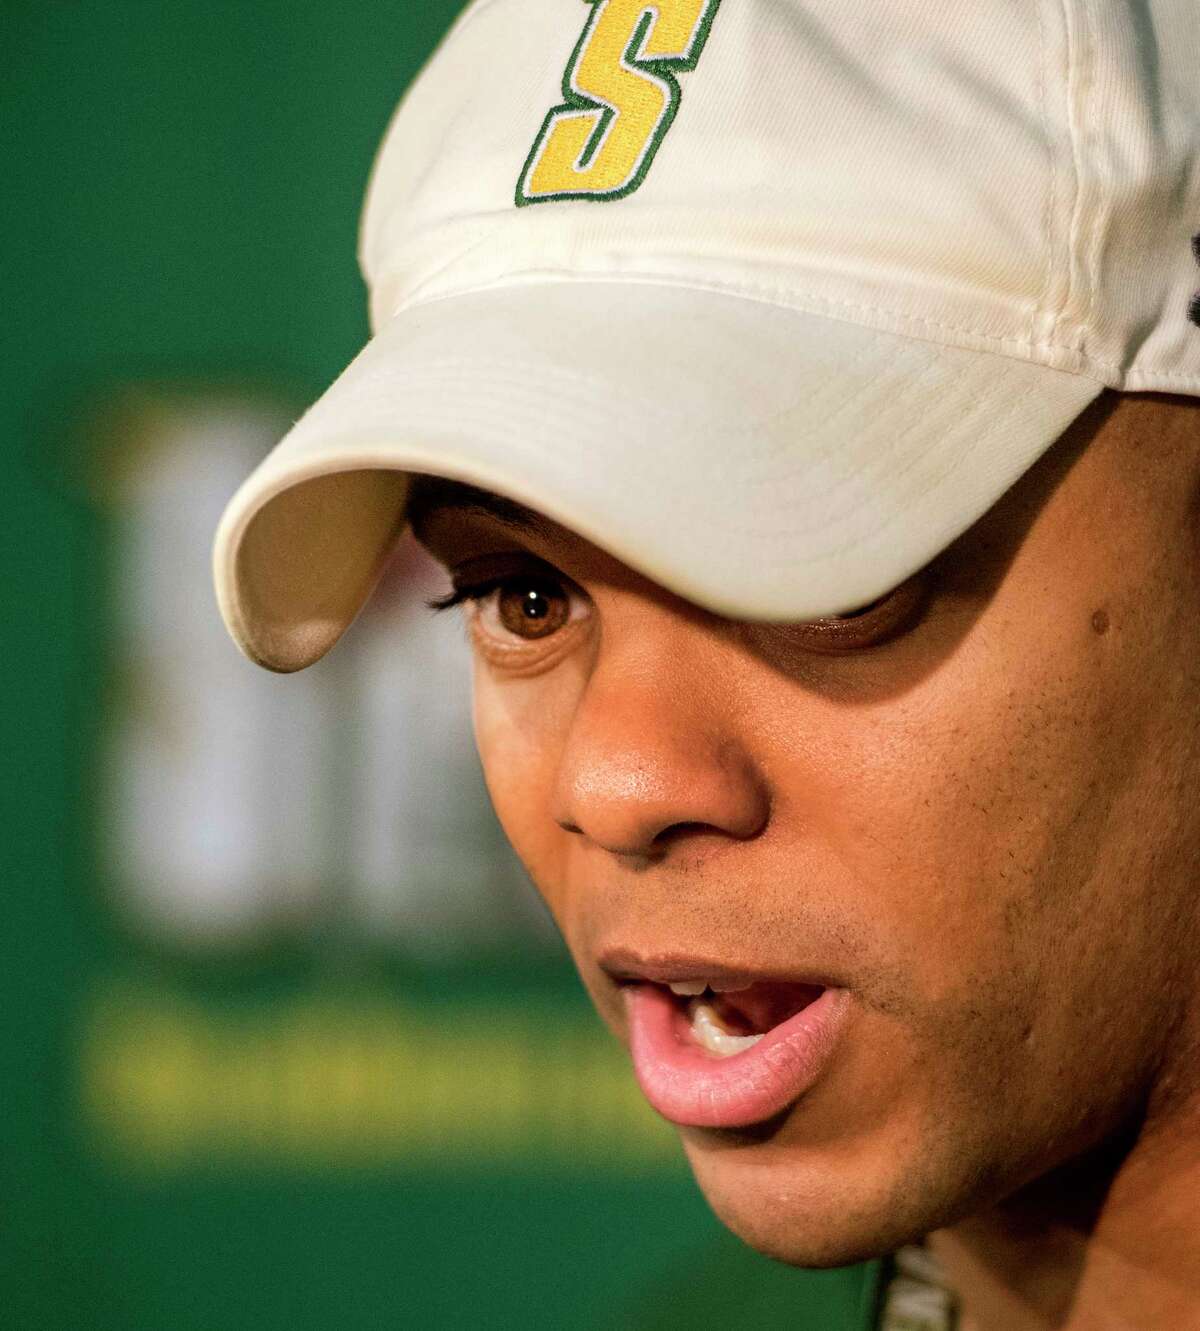 Head Coach Jamion Christian speaks to the media during open practice for the Siena College Men's Basketball Team at the Alumni Recreation Center on the Siena Campus Tuesday Oct. 2, 2018 in Loudonville, N.Y. (Skip Dickstein/Times Union)